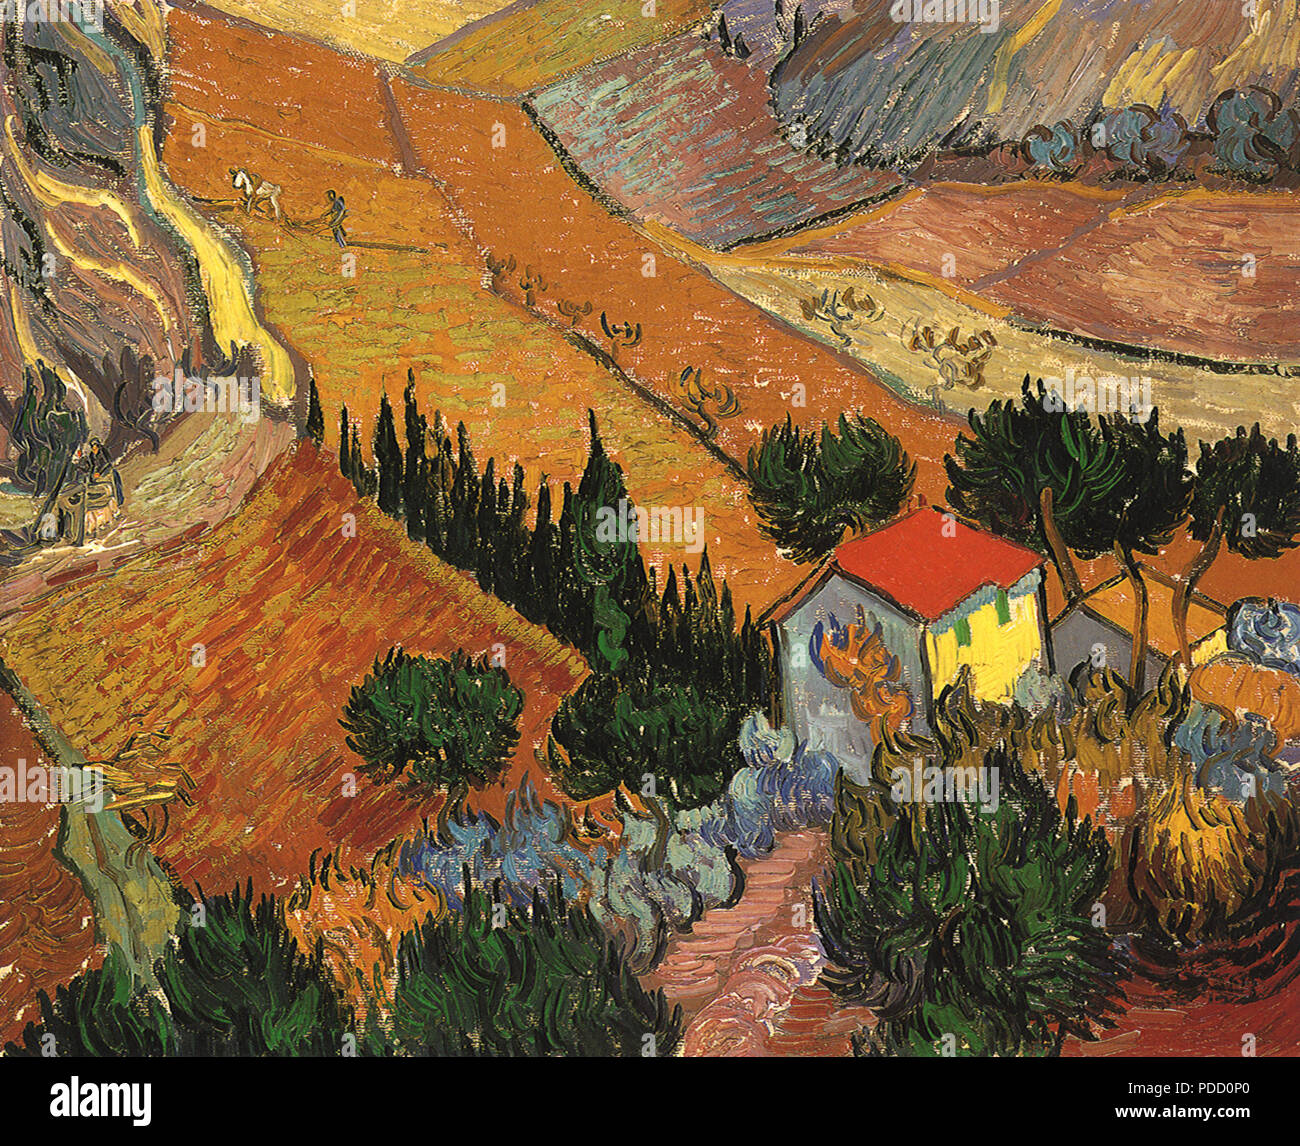 Landscape with House and Ploughman, Van Gogh, Vincent Willem, 1889. Stock Photo